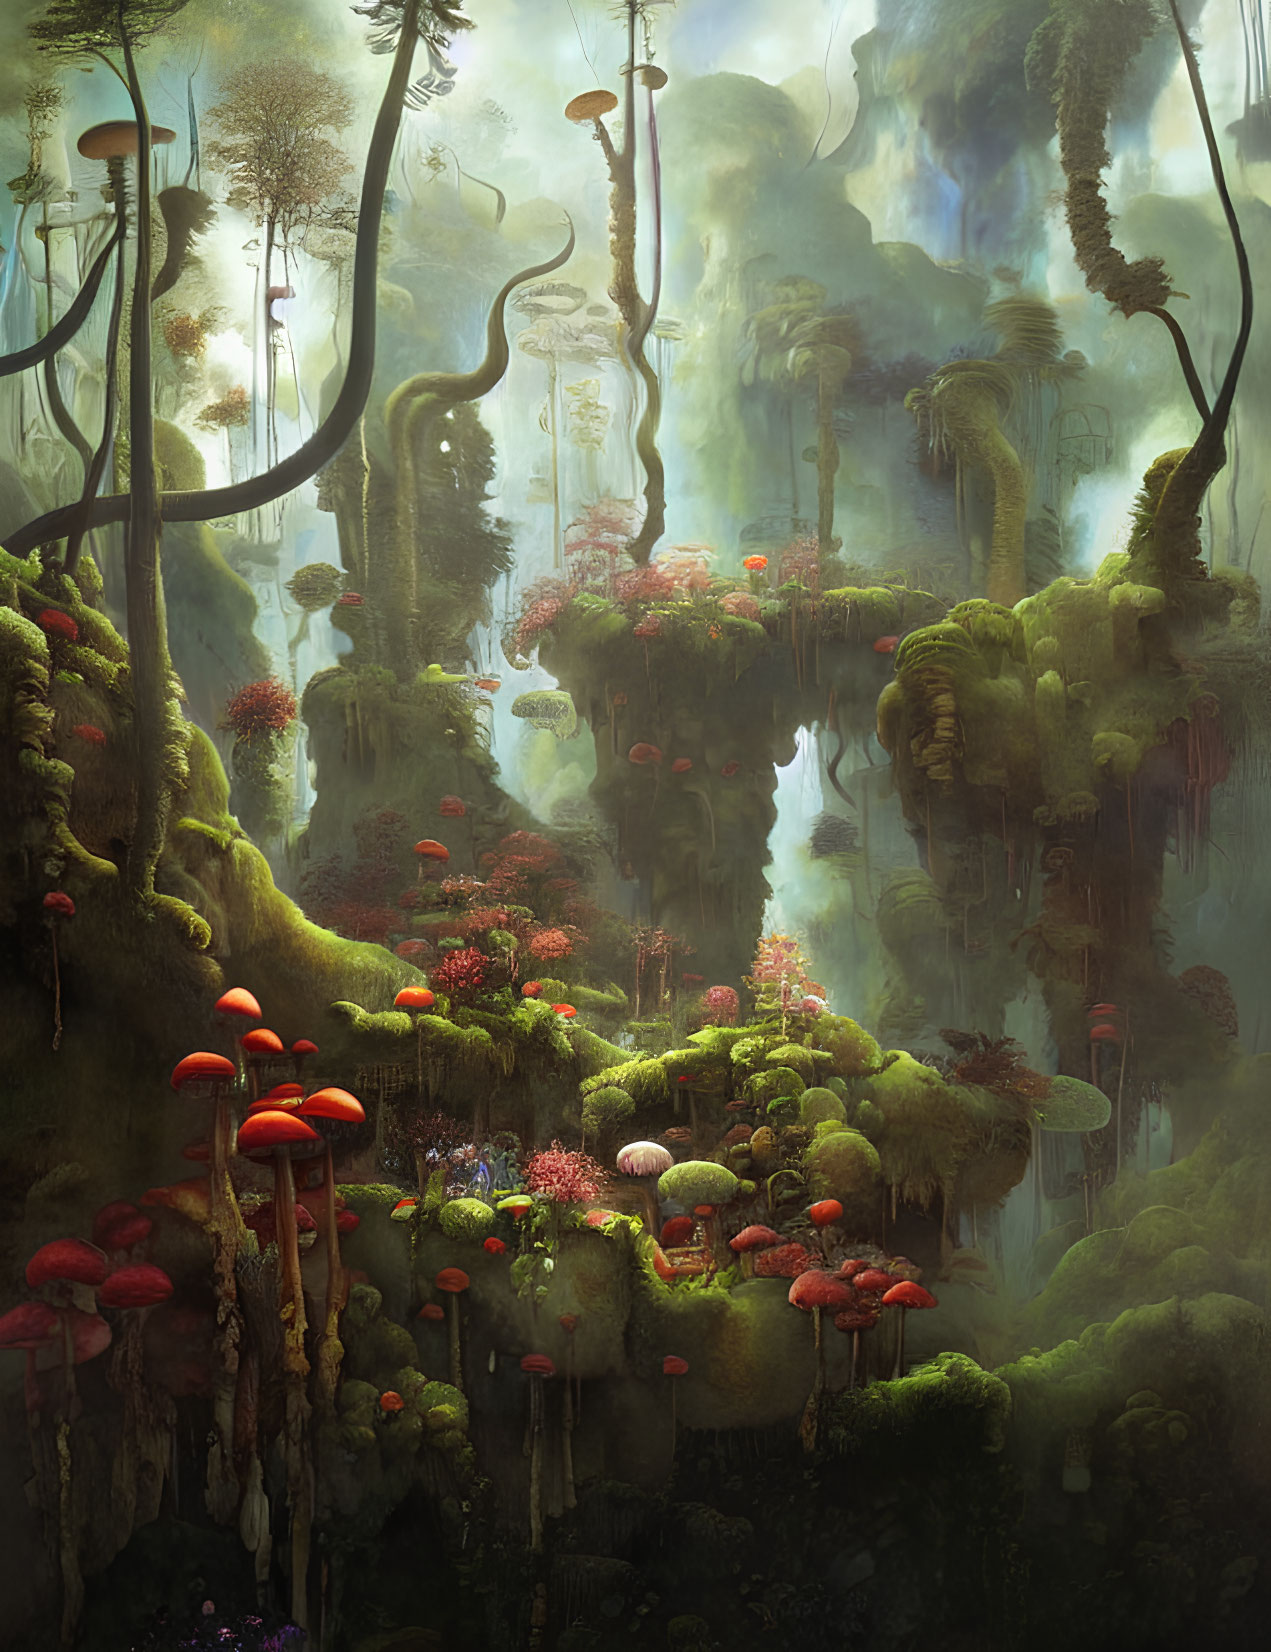 Enchanting forest scene with towering mushrooms and hanging vines